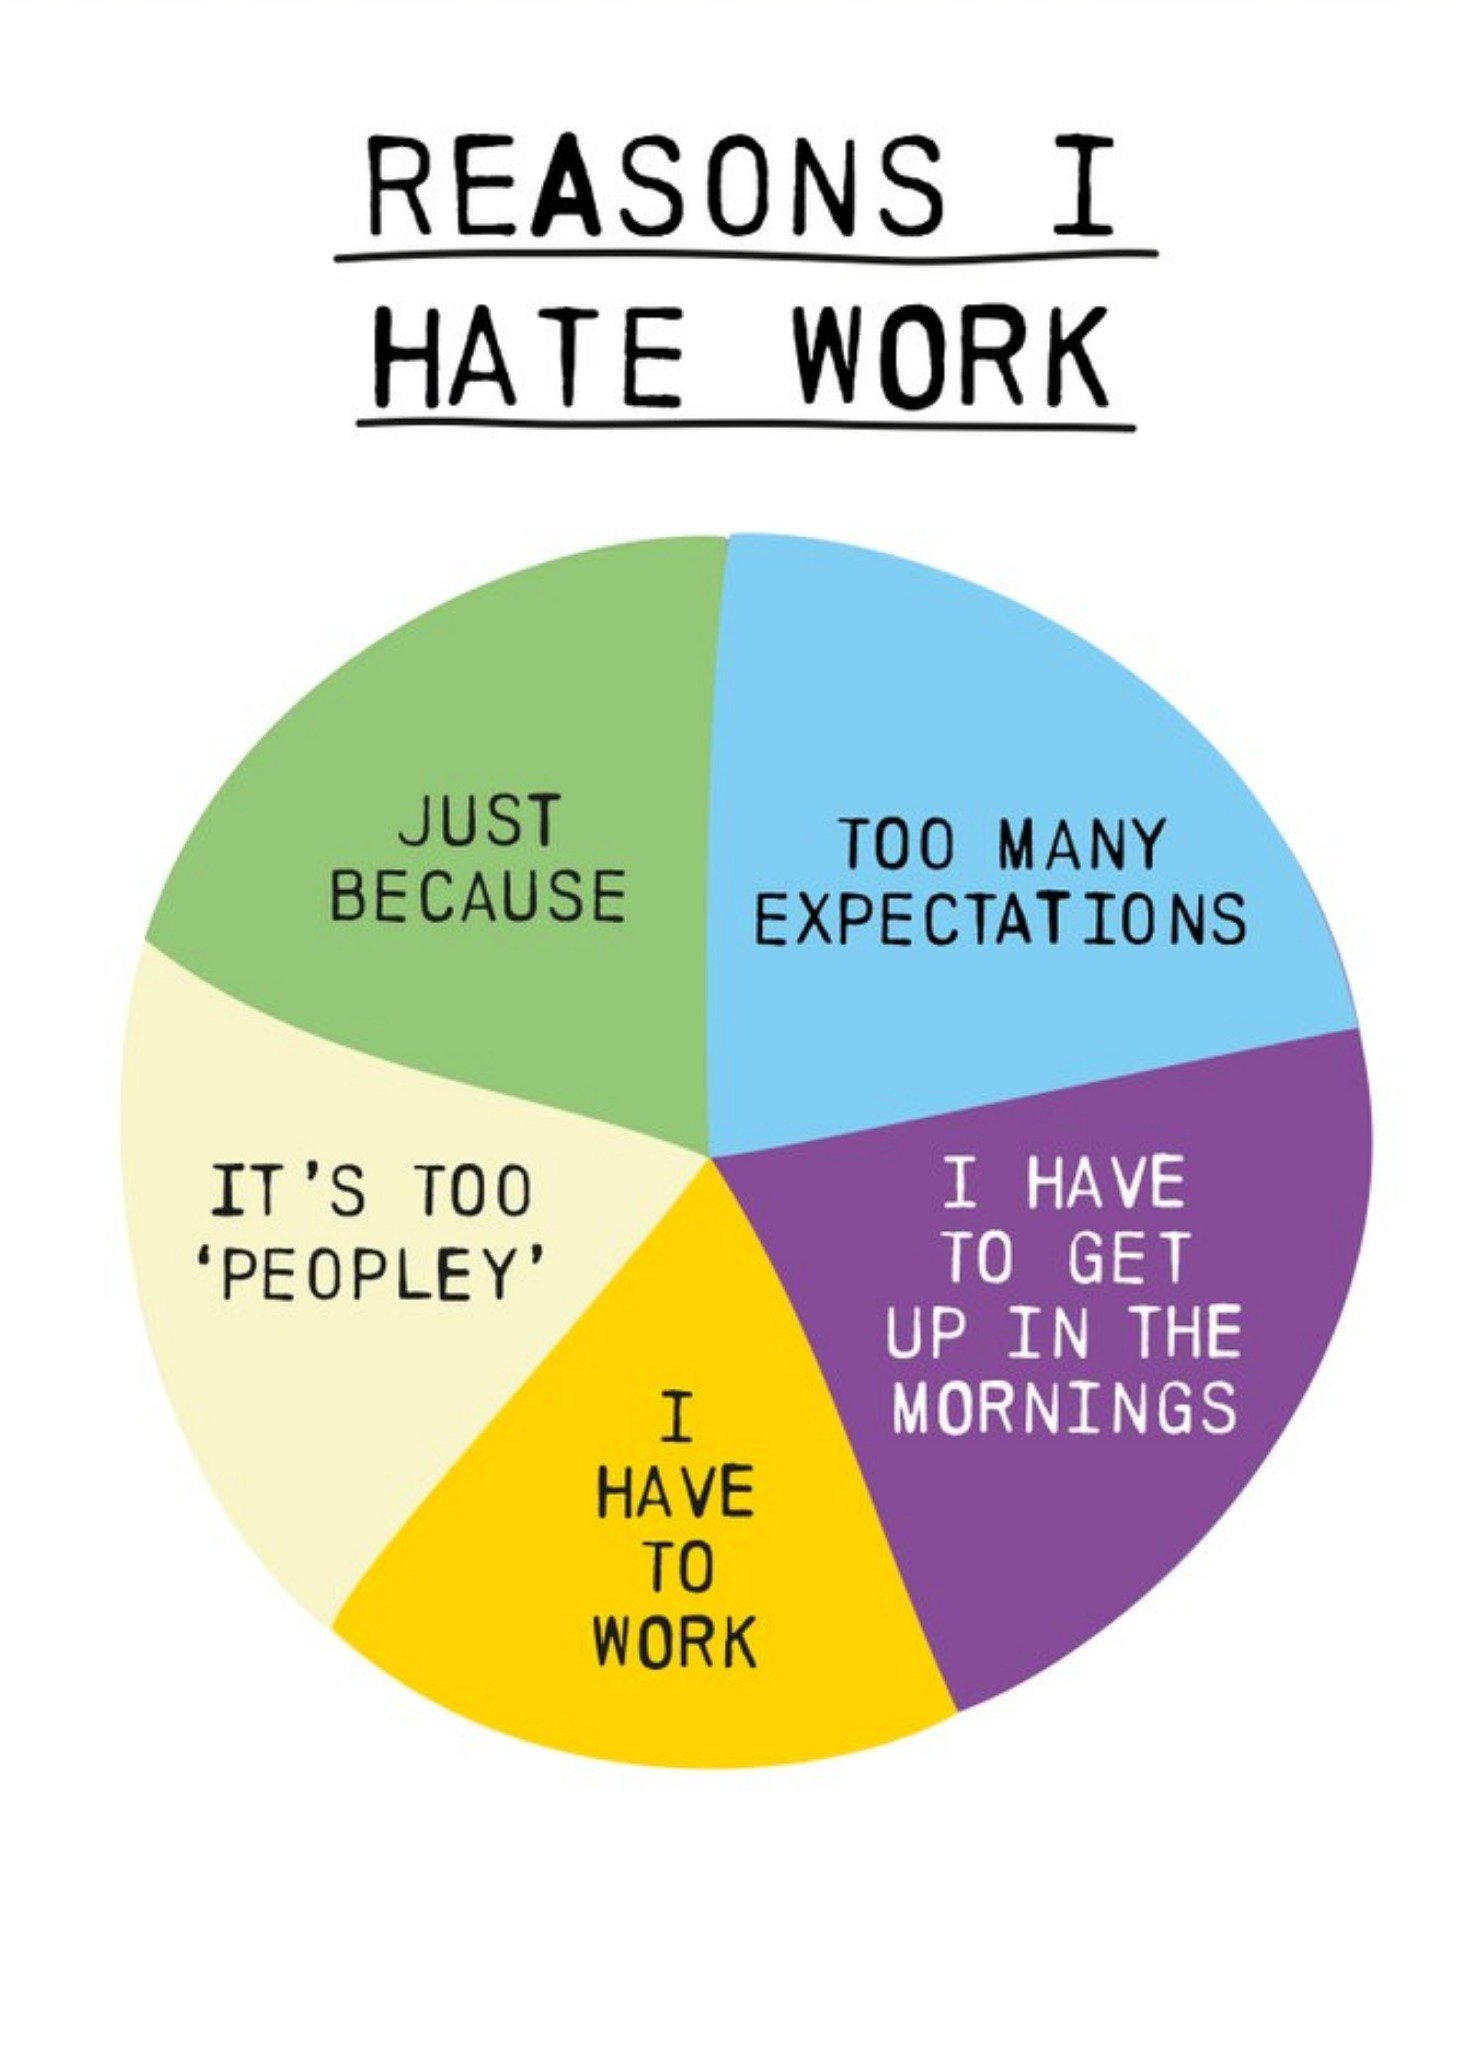 Moonpig Illustration Of A Colourful Pie Chart Reasons I Hate Work Humorous Birthday Card Ecard